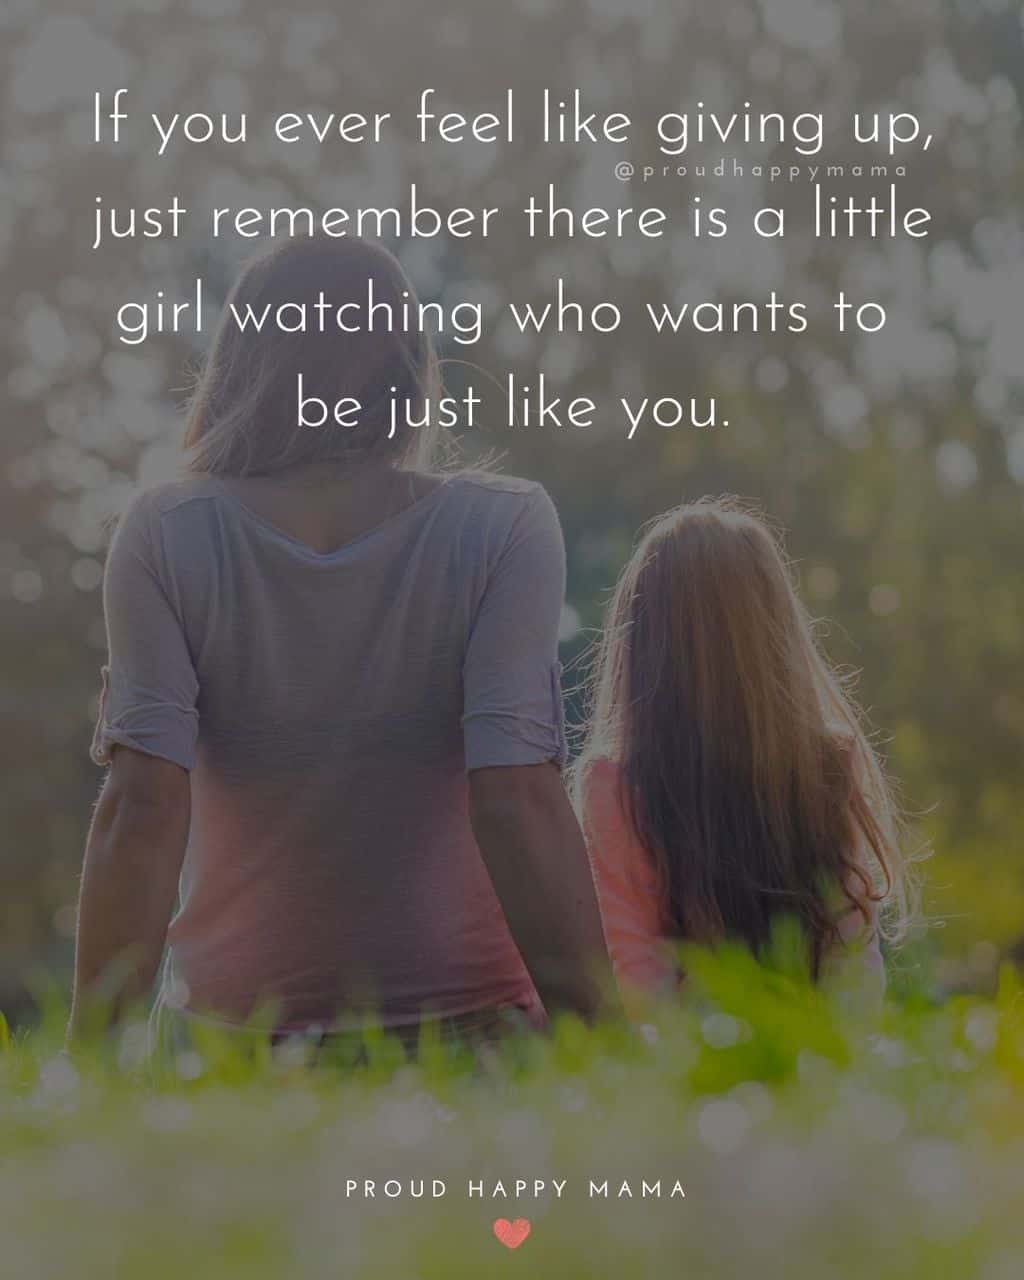 beautiful daughter quotes short - ‘If you ever feel like giving up, just remember there is a little girl watching who wants to be just like you.’